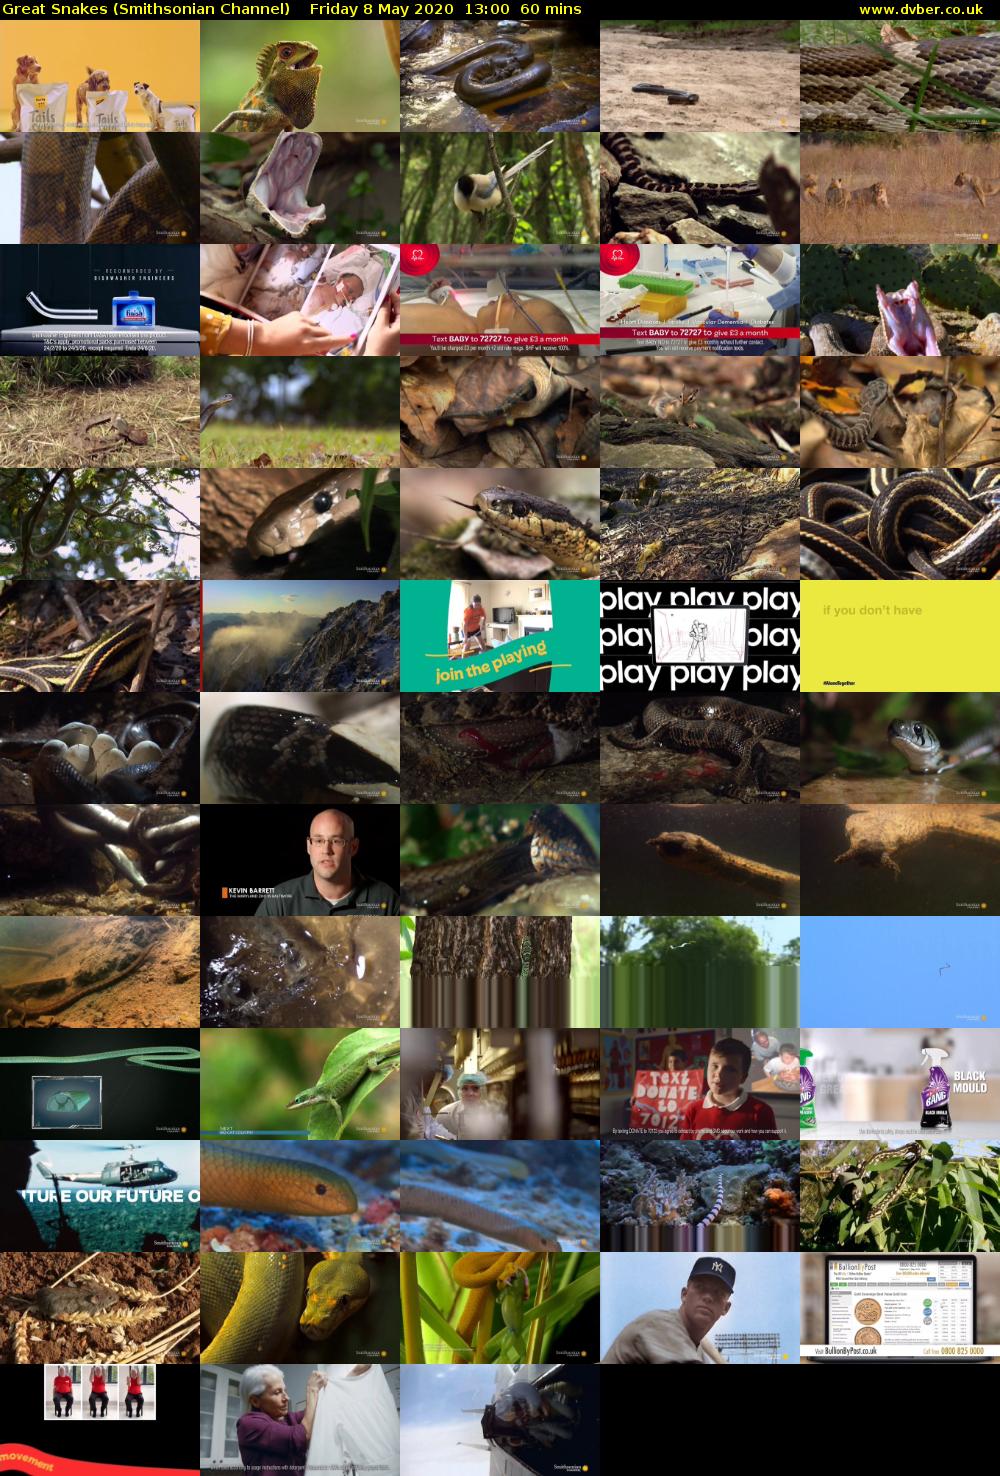 Great Snakes (Smithsonian Channel) Friday 8 May 2020 13:00 - 14:00